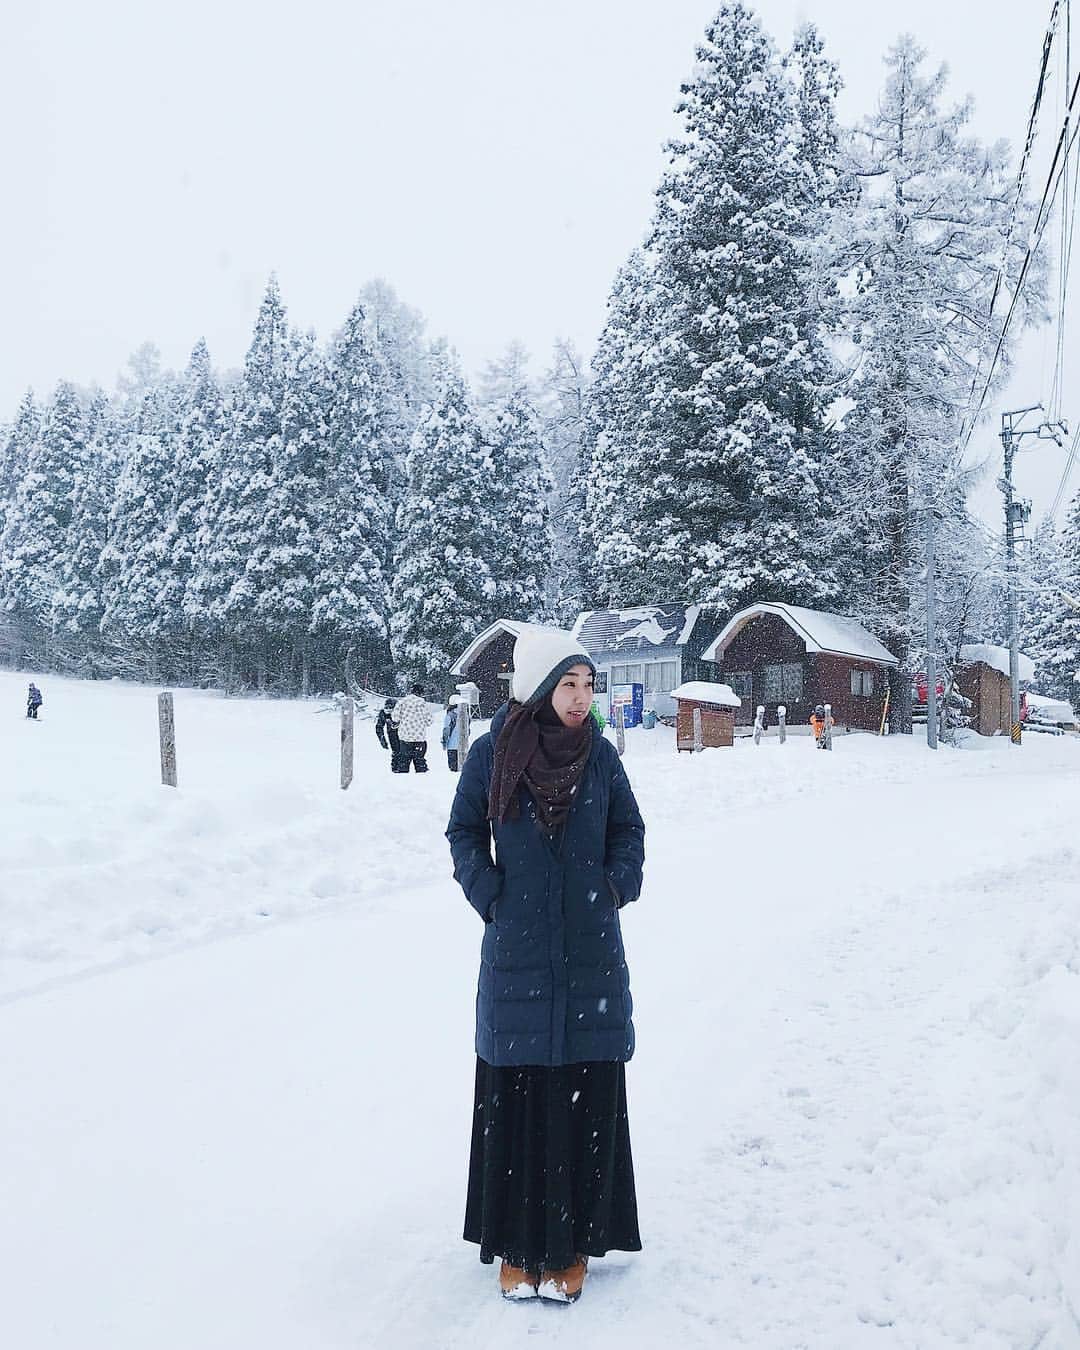 Risa Mizunoのインスタグラム：「The first travel destination in 2018 was at Hakuba village in Nagano prefecture and it was full of beautiful nature. Mashallah ❄️ I love to explore different regions of my country, Japan! There will be always new experience and inspiration ✨  #japanesemuslim #japanesemuslimah #muslim #muslimah #japanese #japan #tokyo #malaysia #muslimahtokyo #travel #travelblogger #travelgram #travellover #travellife #beautifulexplorers #wearetravelgirls #hijab #tudung #snow  #japanlife #日本人ムスリム #日本 #東京 #マレーシア #国際結婚 #🇲🇾 #❤️ #🇯🇵」